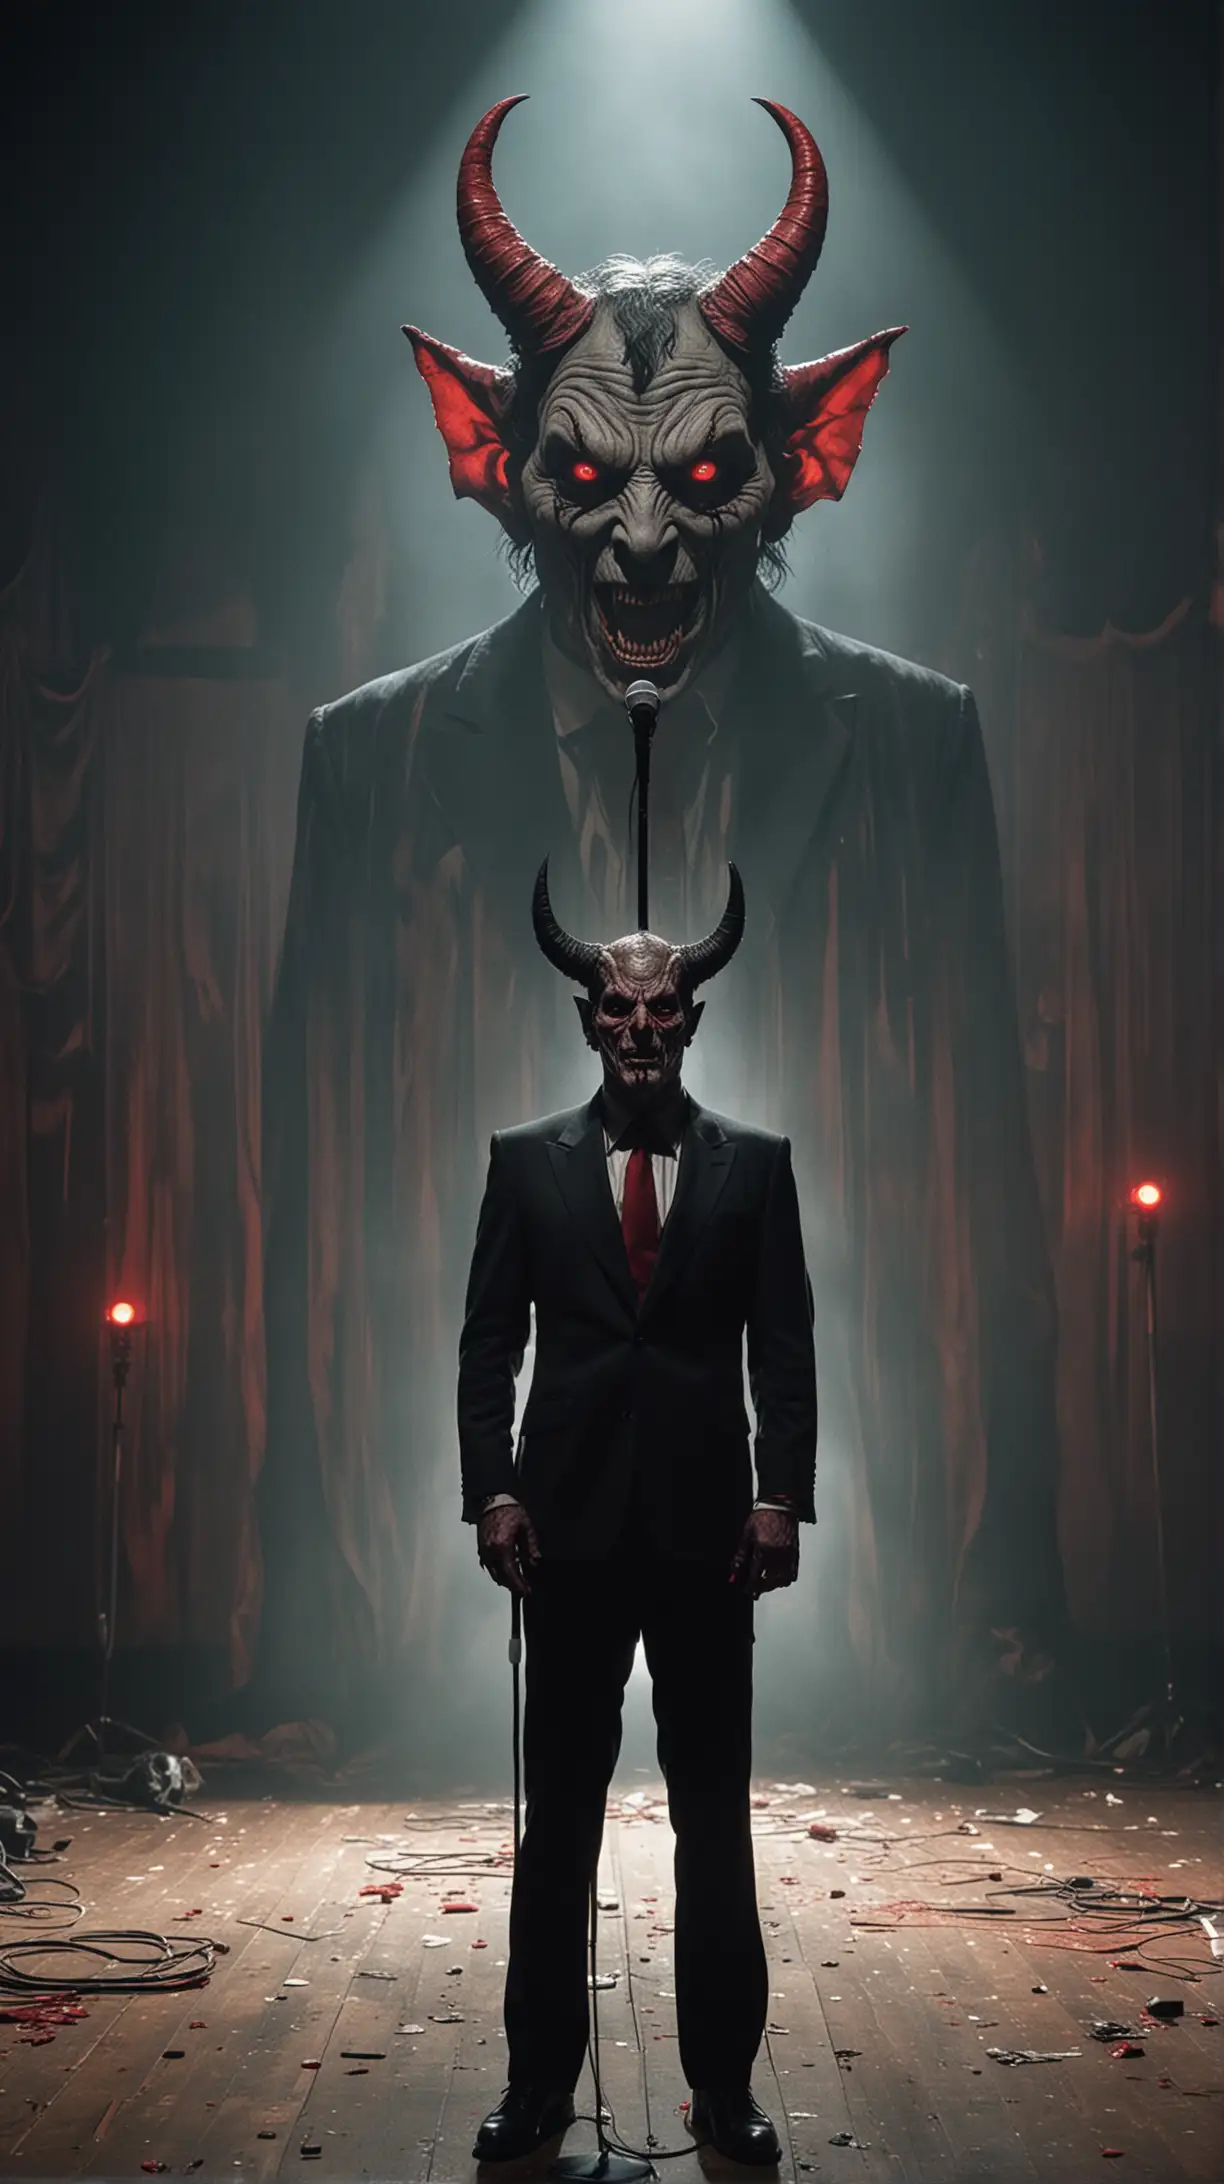 The scene features an empty stage, within which stands a suited man holding a microphone with the devil's face, complete with horns and sinister red eyes. The style captures a distressed 1980s horror aesthetic with striking visual impact. Satanic horror 